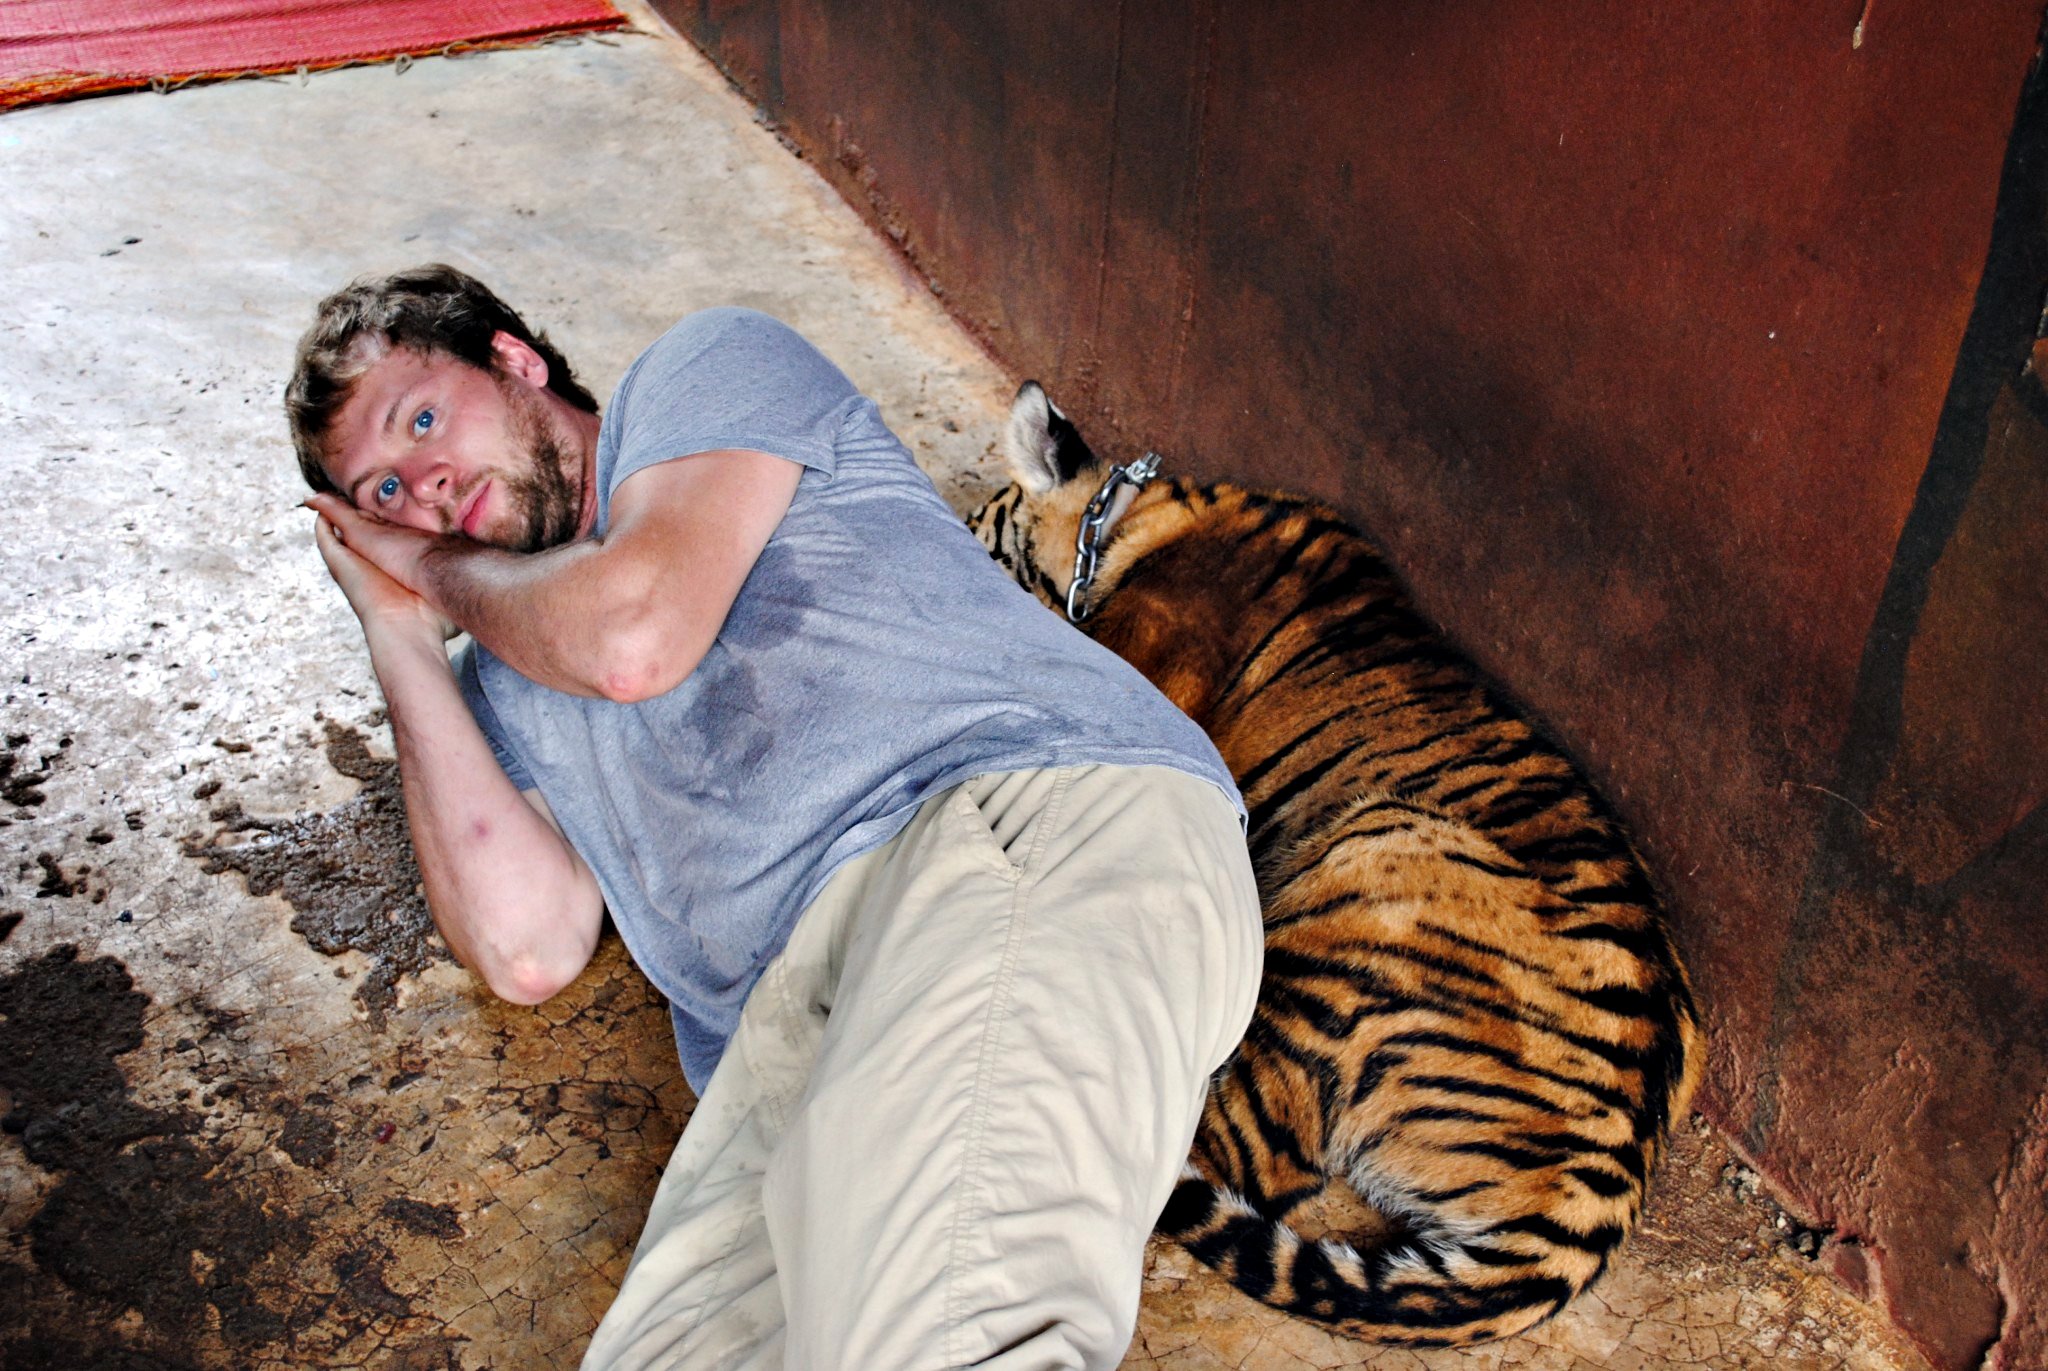 Let me introduce you to my friend Blake. We met up with him in Asia while we were on fall break. One day we went to a tiger temple in Thailand and played with the cutest (but surprisingly biggish) tiger cubs. We played with them for a few minutes then we fed them some milk. Most of them passed out on the cool concrete floor. Blake casually snuggled up to this meat-eating feline, asks me to snap a photo then says, "I just want to be the little spoon". One of the funniest moments of the trip.